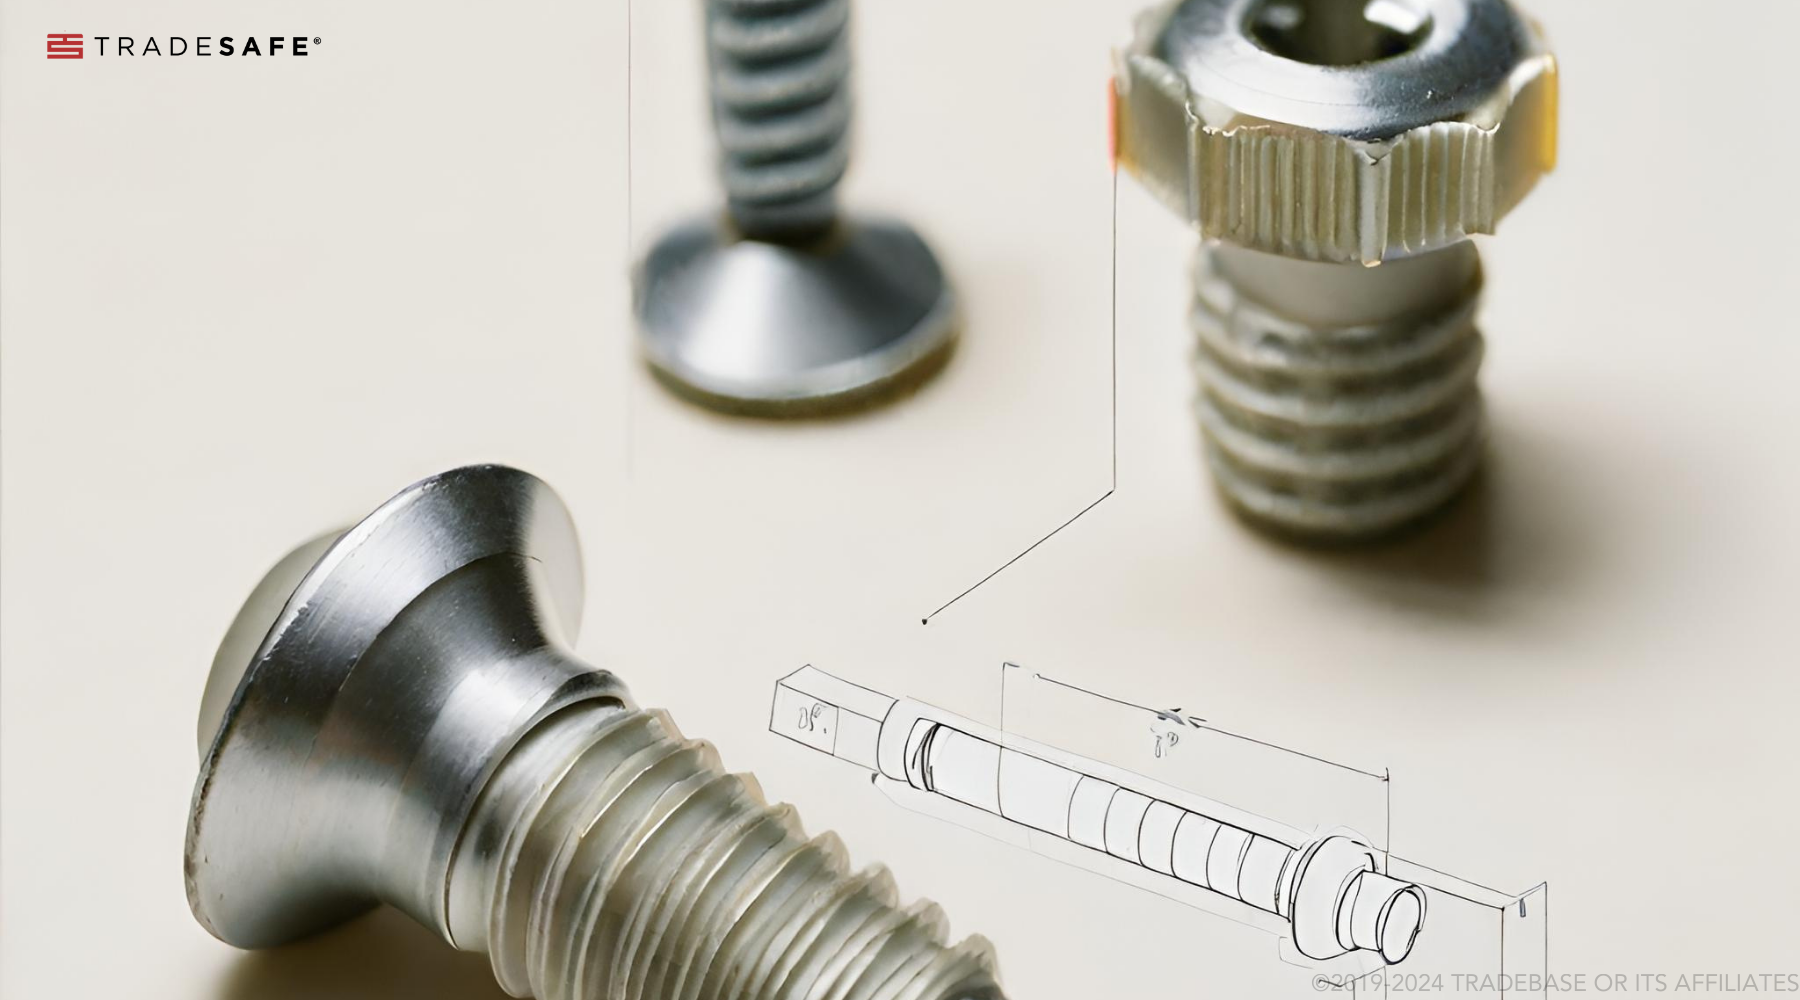 Mastering Screw Threads Design: Standards, Types, and